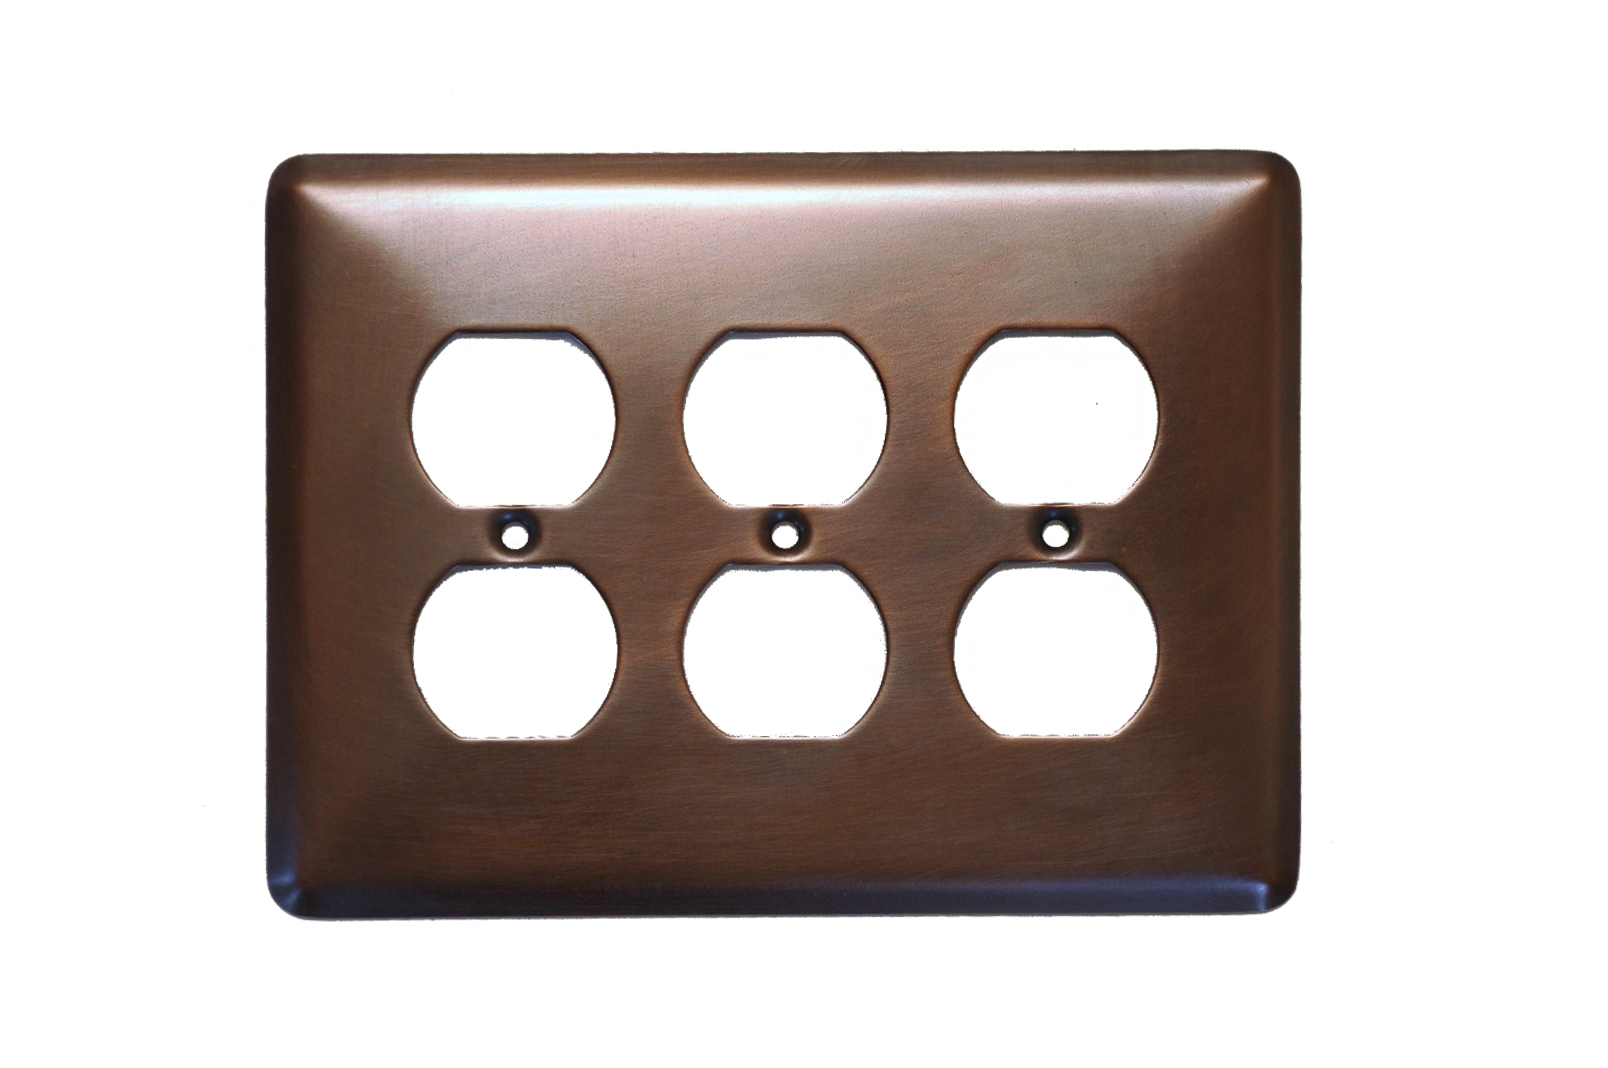 Picture of 1-5 gang Duplex Outlet Copper Plate Cover